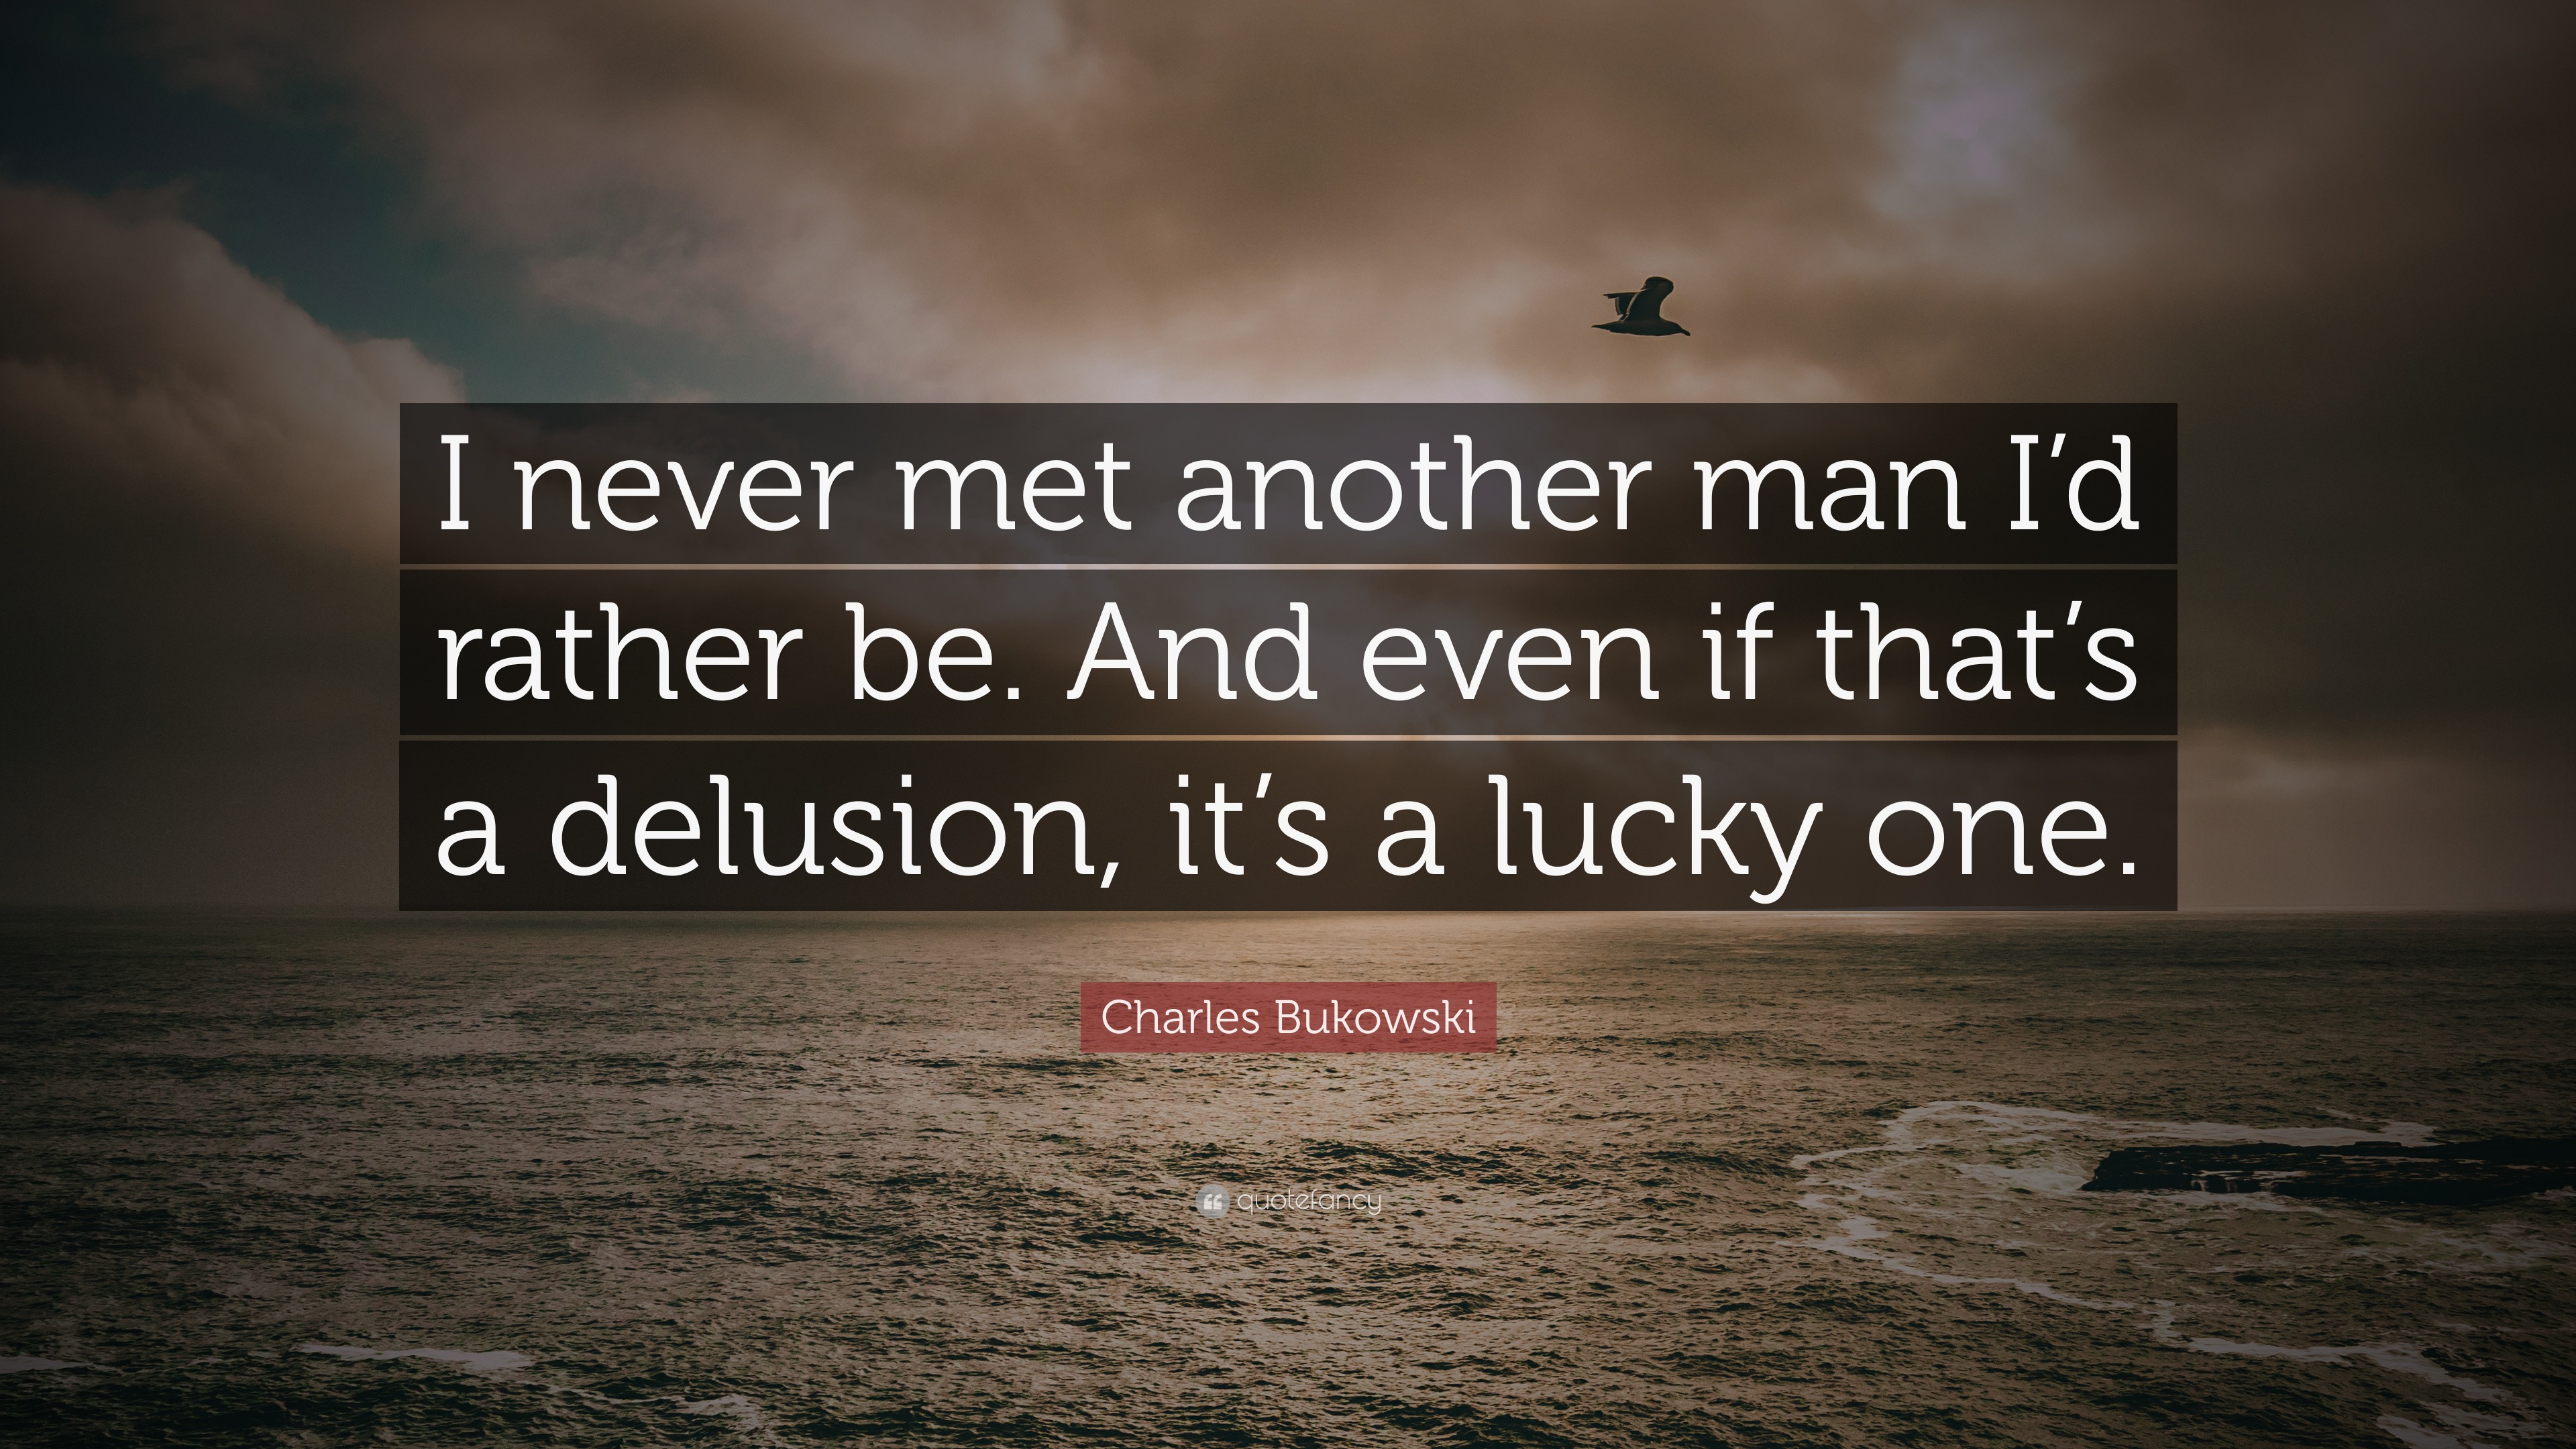 Charles Bukowski Quote: “I never met another man I’d rather be. And ...